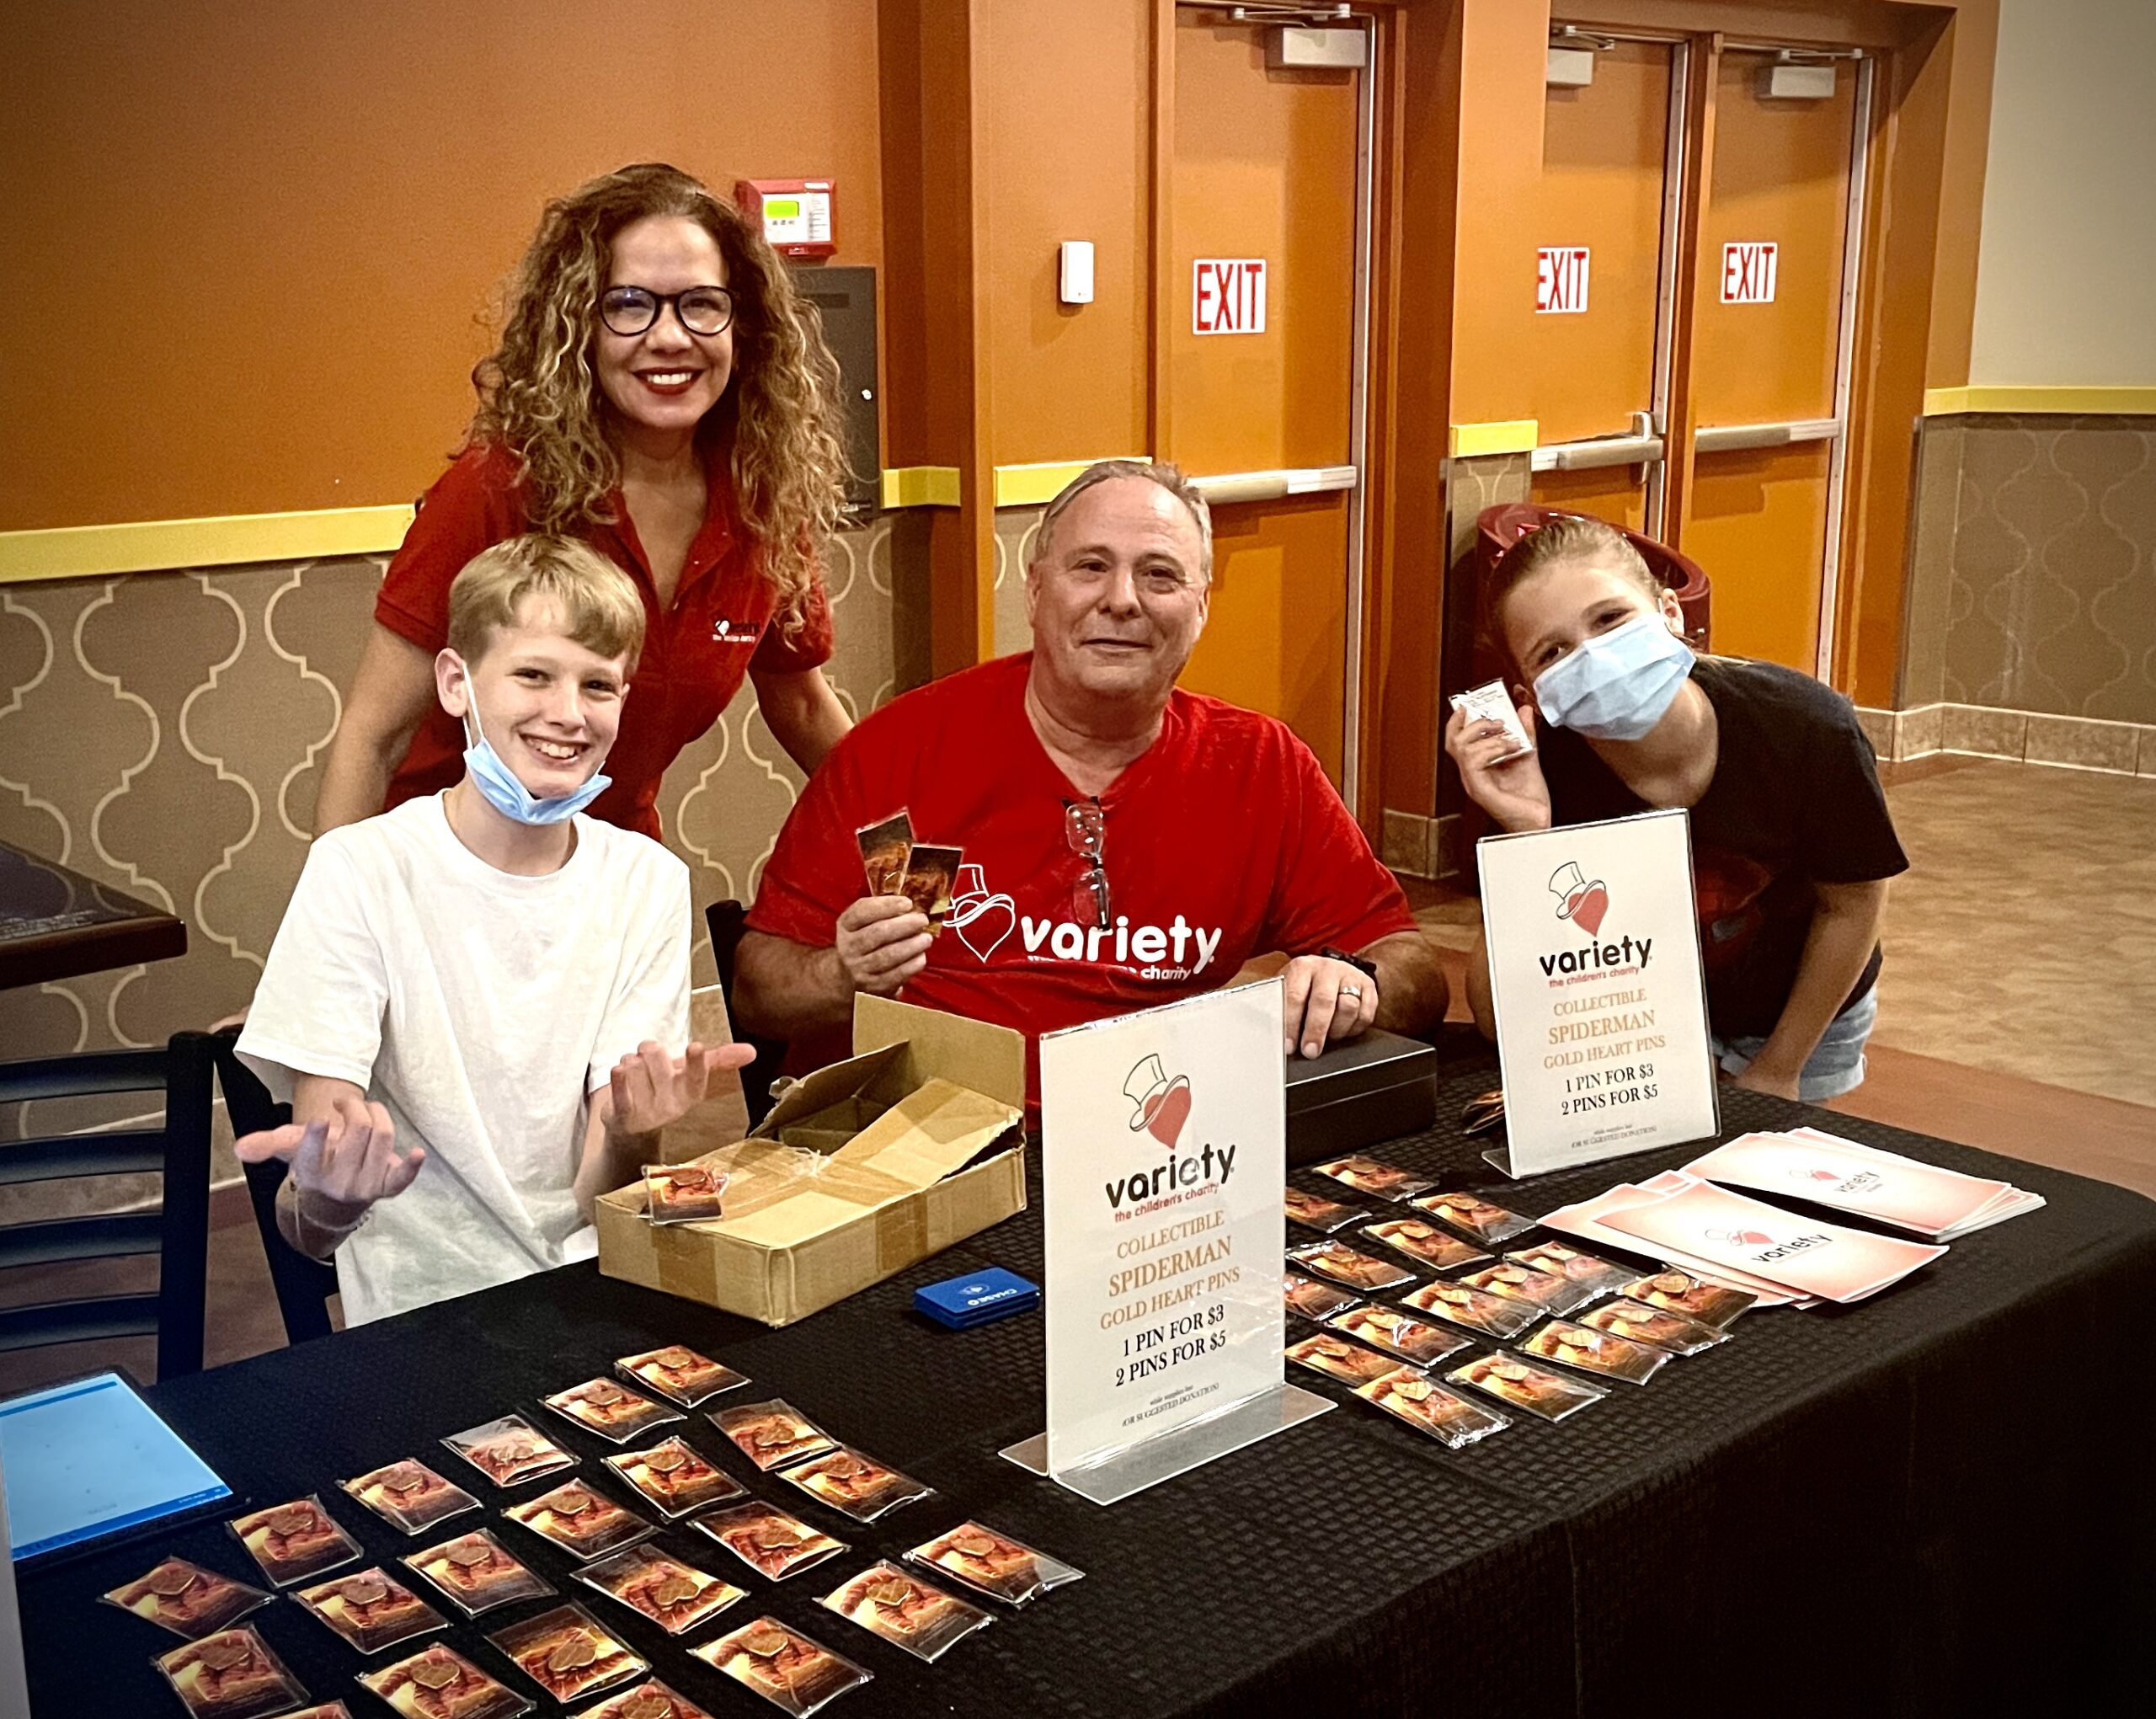 SPIDER-MAN NIGHT AT EPIC THEATRES - Variety the Children's Charity of  Florida